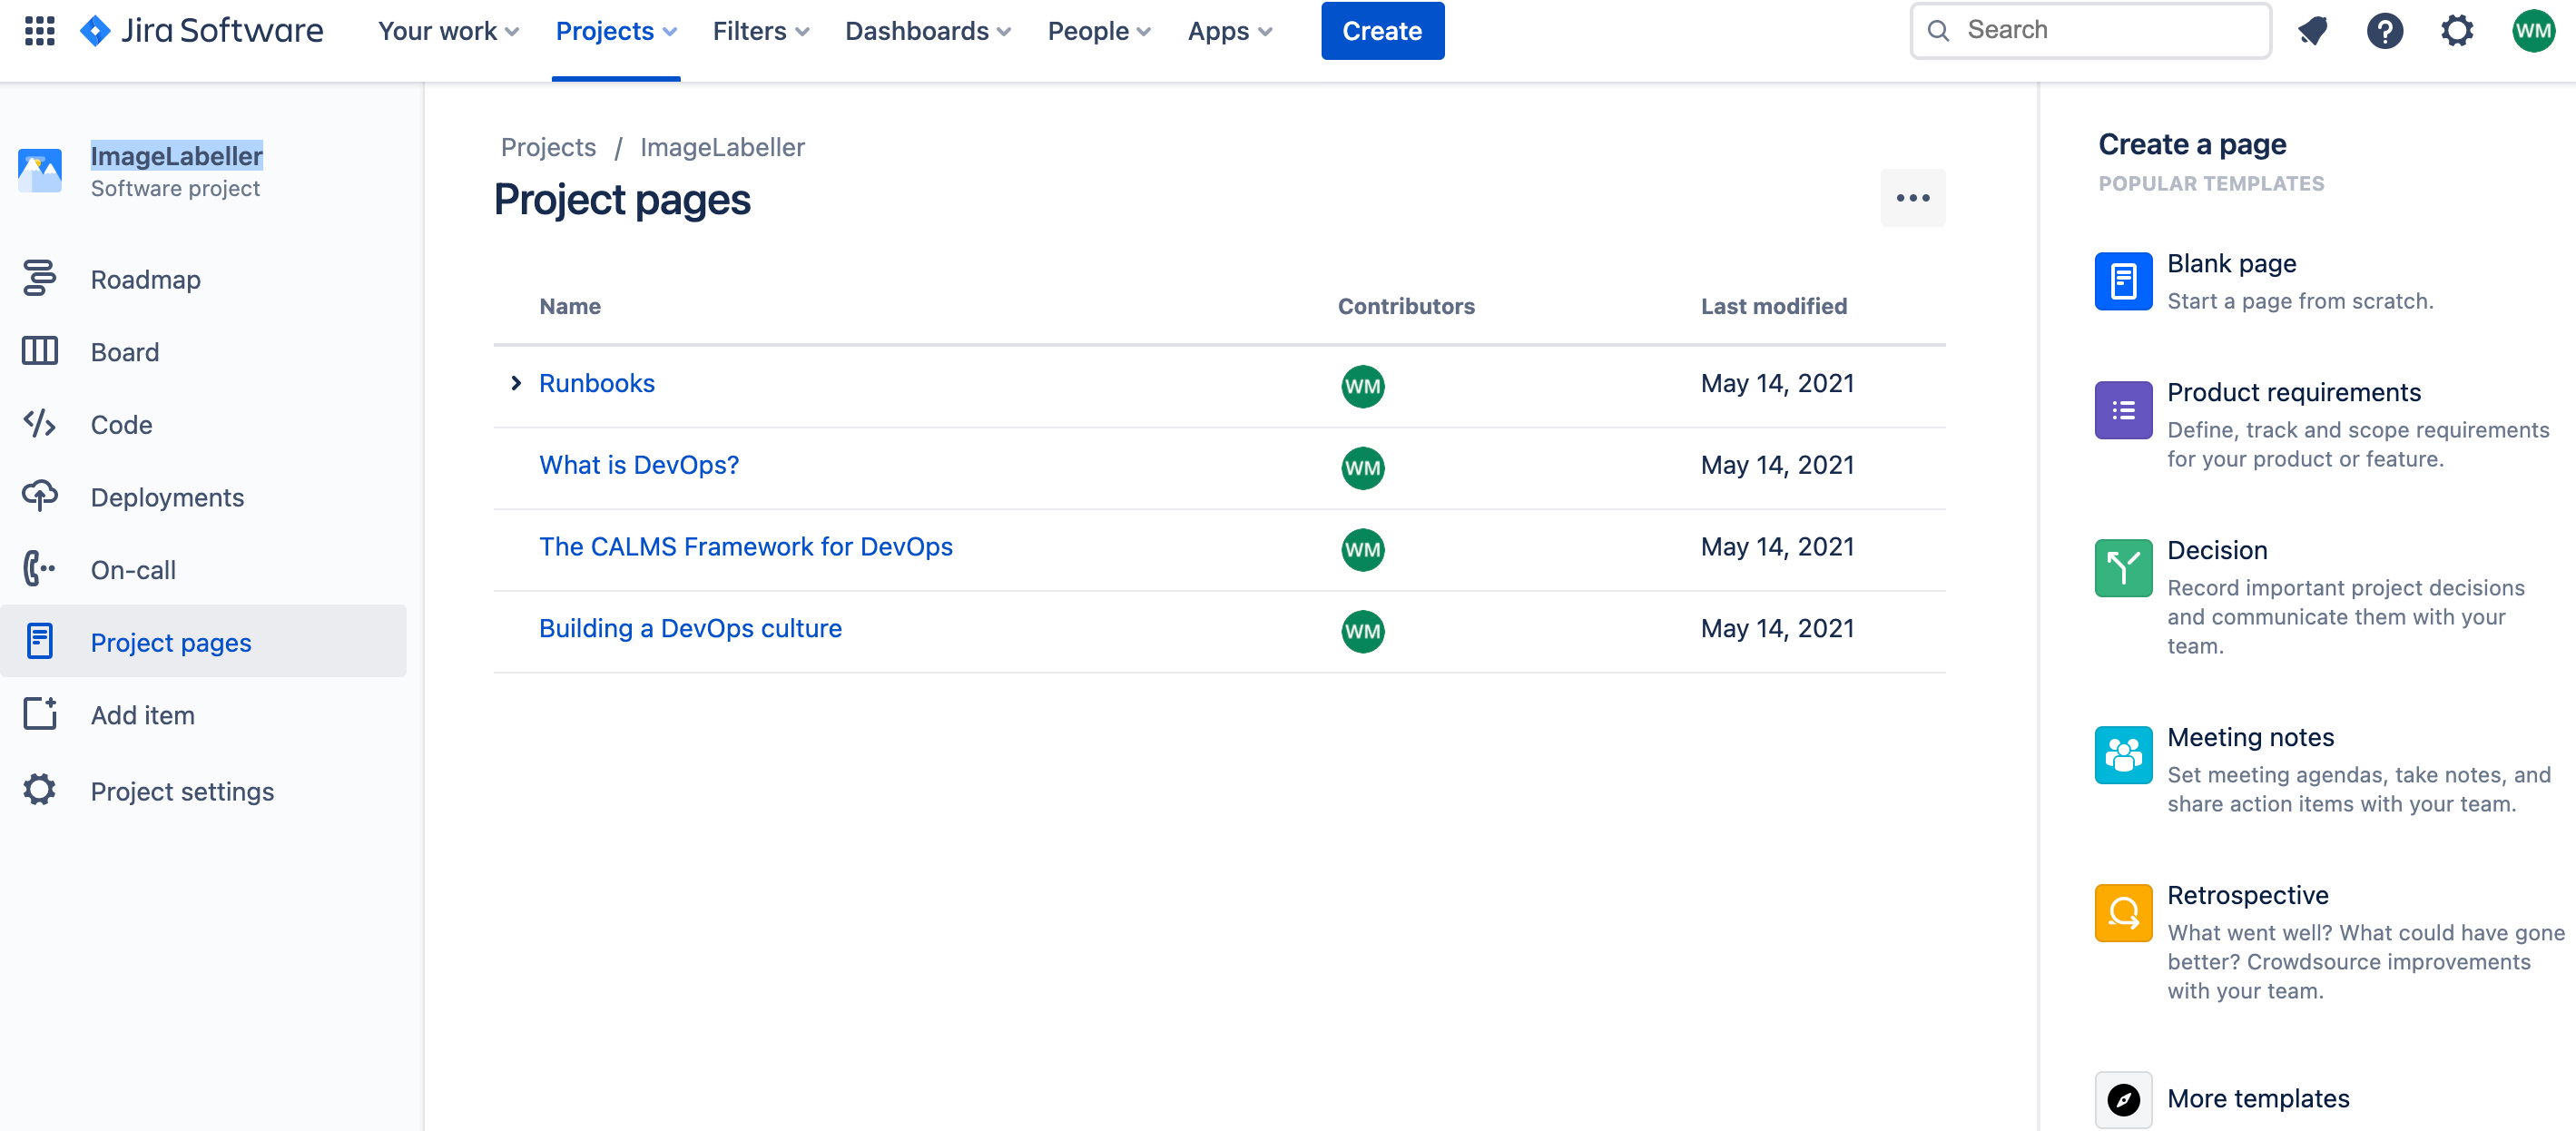 Jira projects pages showing related Confluence documents